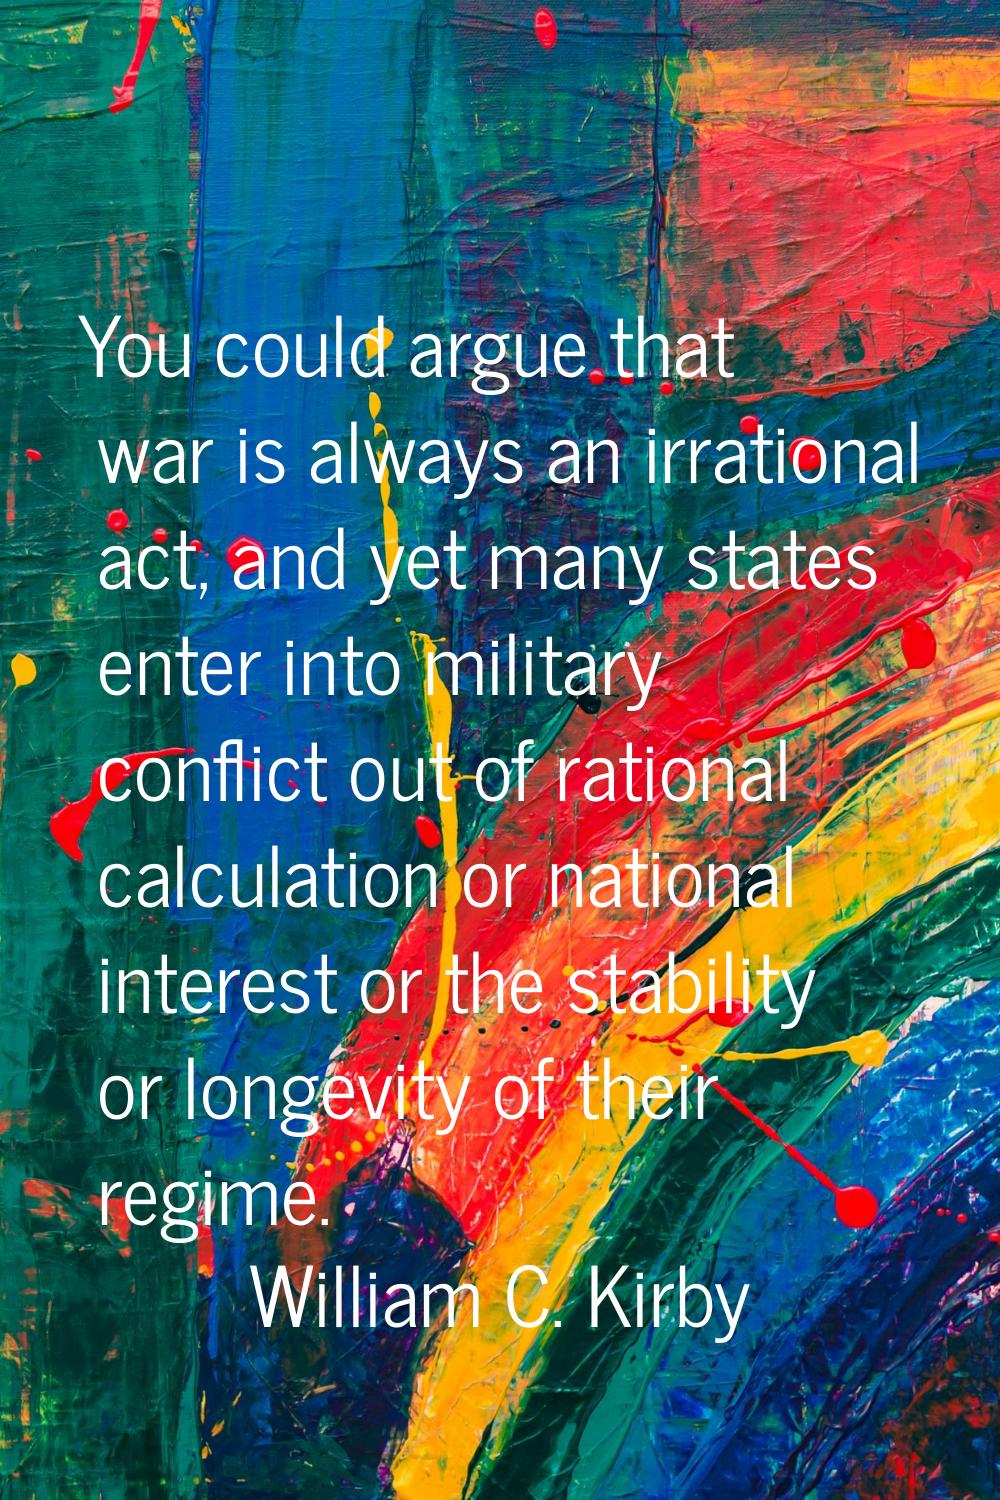 You could argue that war is always an irrational act, and yet many states enter into military confl